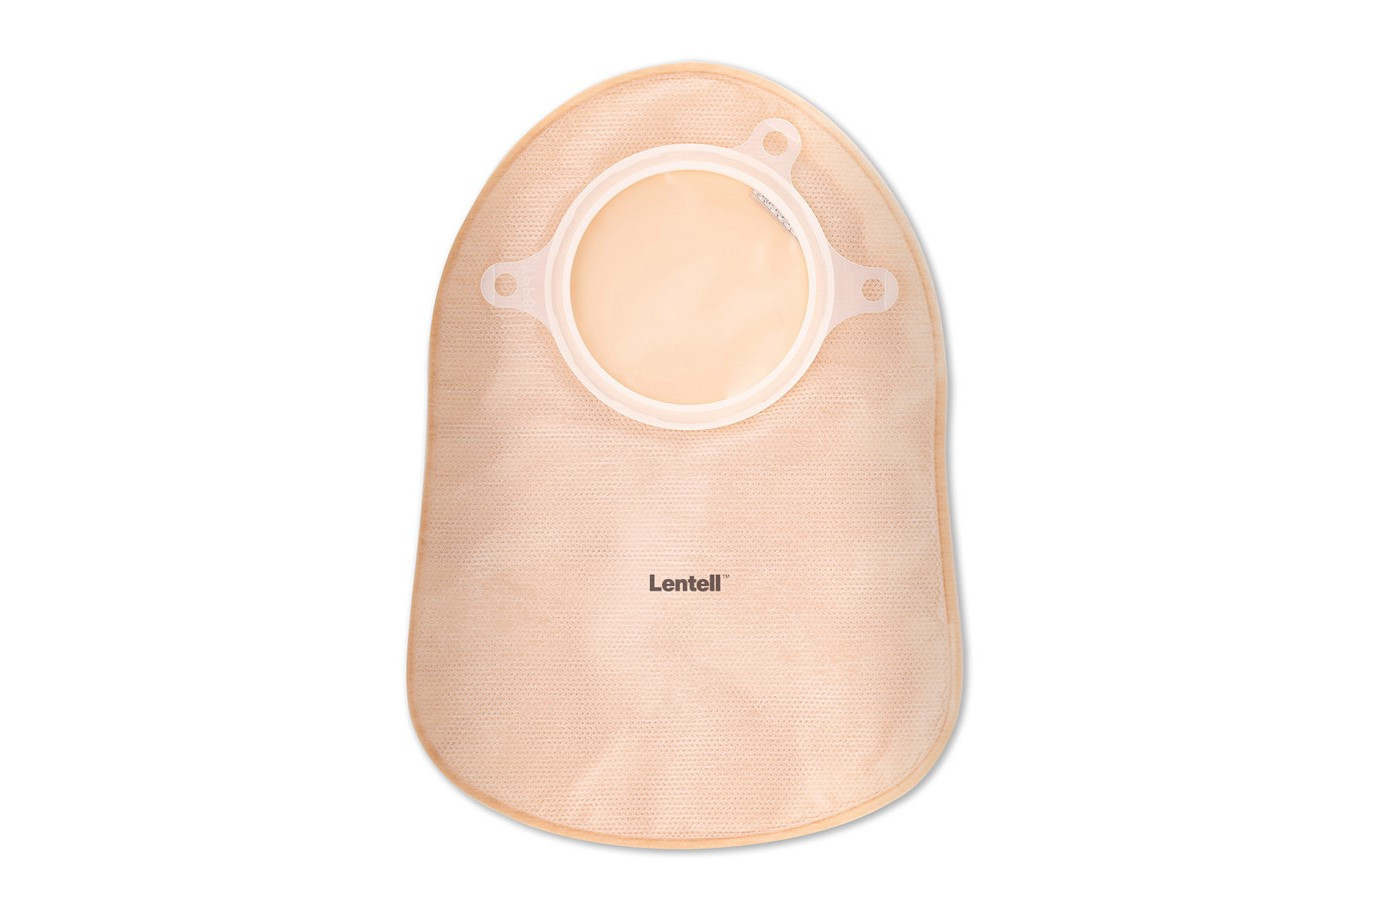 LENTELL COLOBAG II TWO-PIECE POUCHING SYSTEM